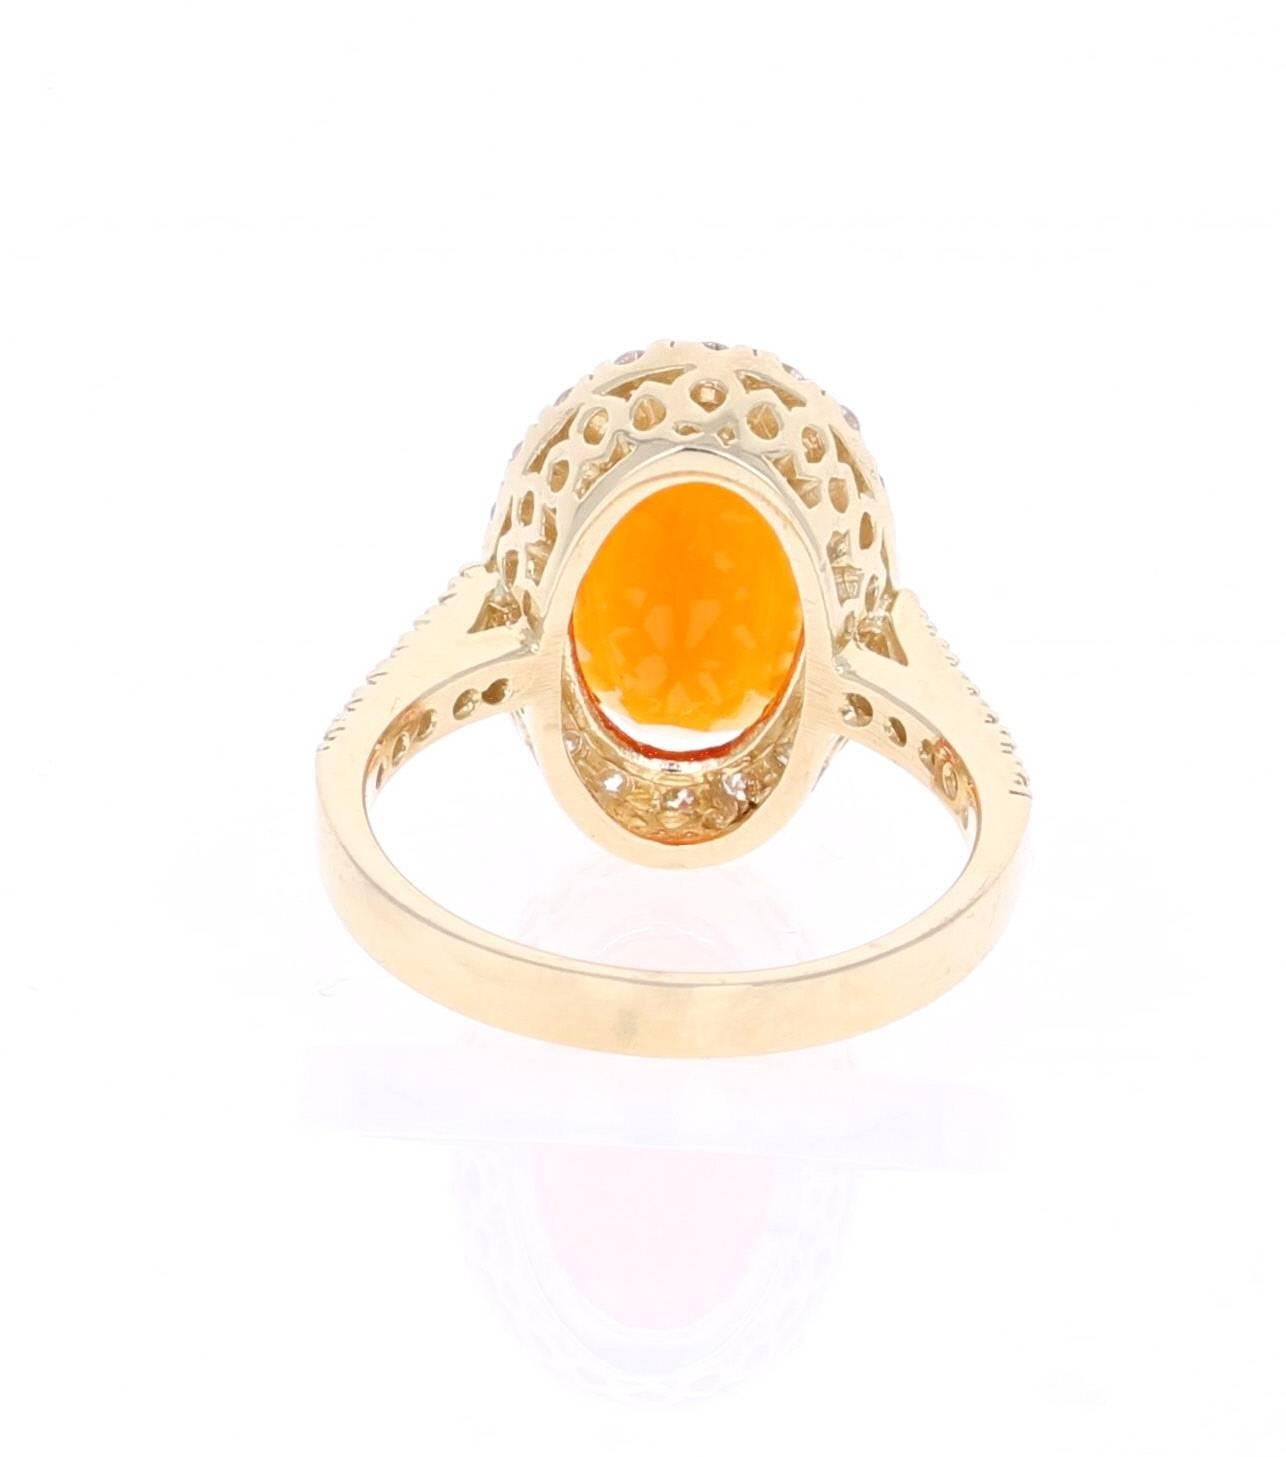 Oval Cut 3.22 Carat Fire Opal Diamond Cocktail Yellow Gold Ring